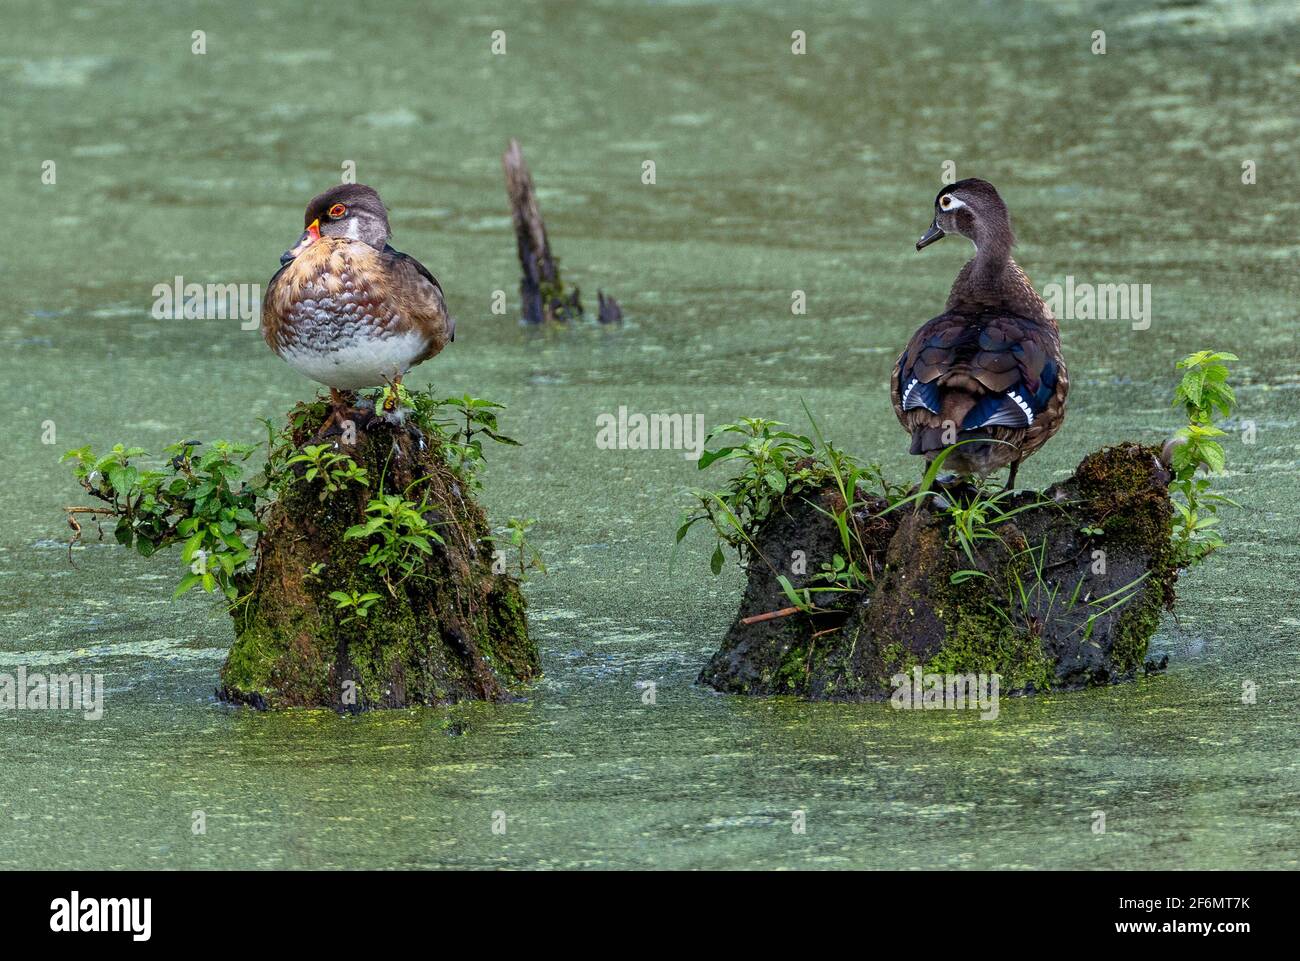 Two Wood Ducks (Aix sponsa) sit on top of dead stumps in a marsh covered with duckweed. Stock Photo